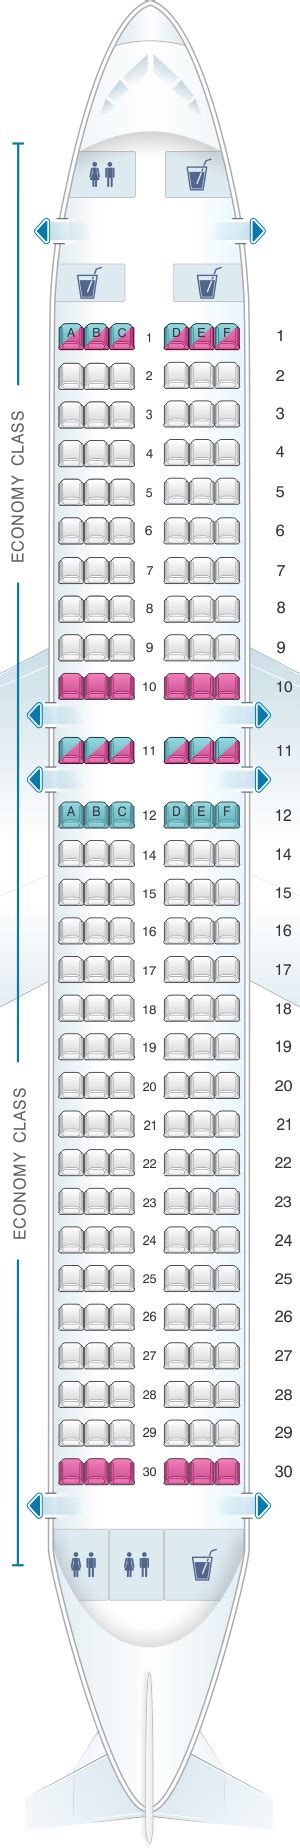 Airbus A320neo Seat Map